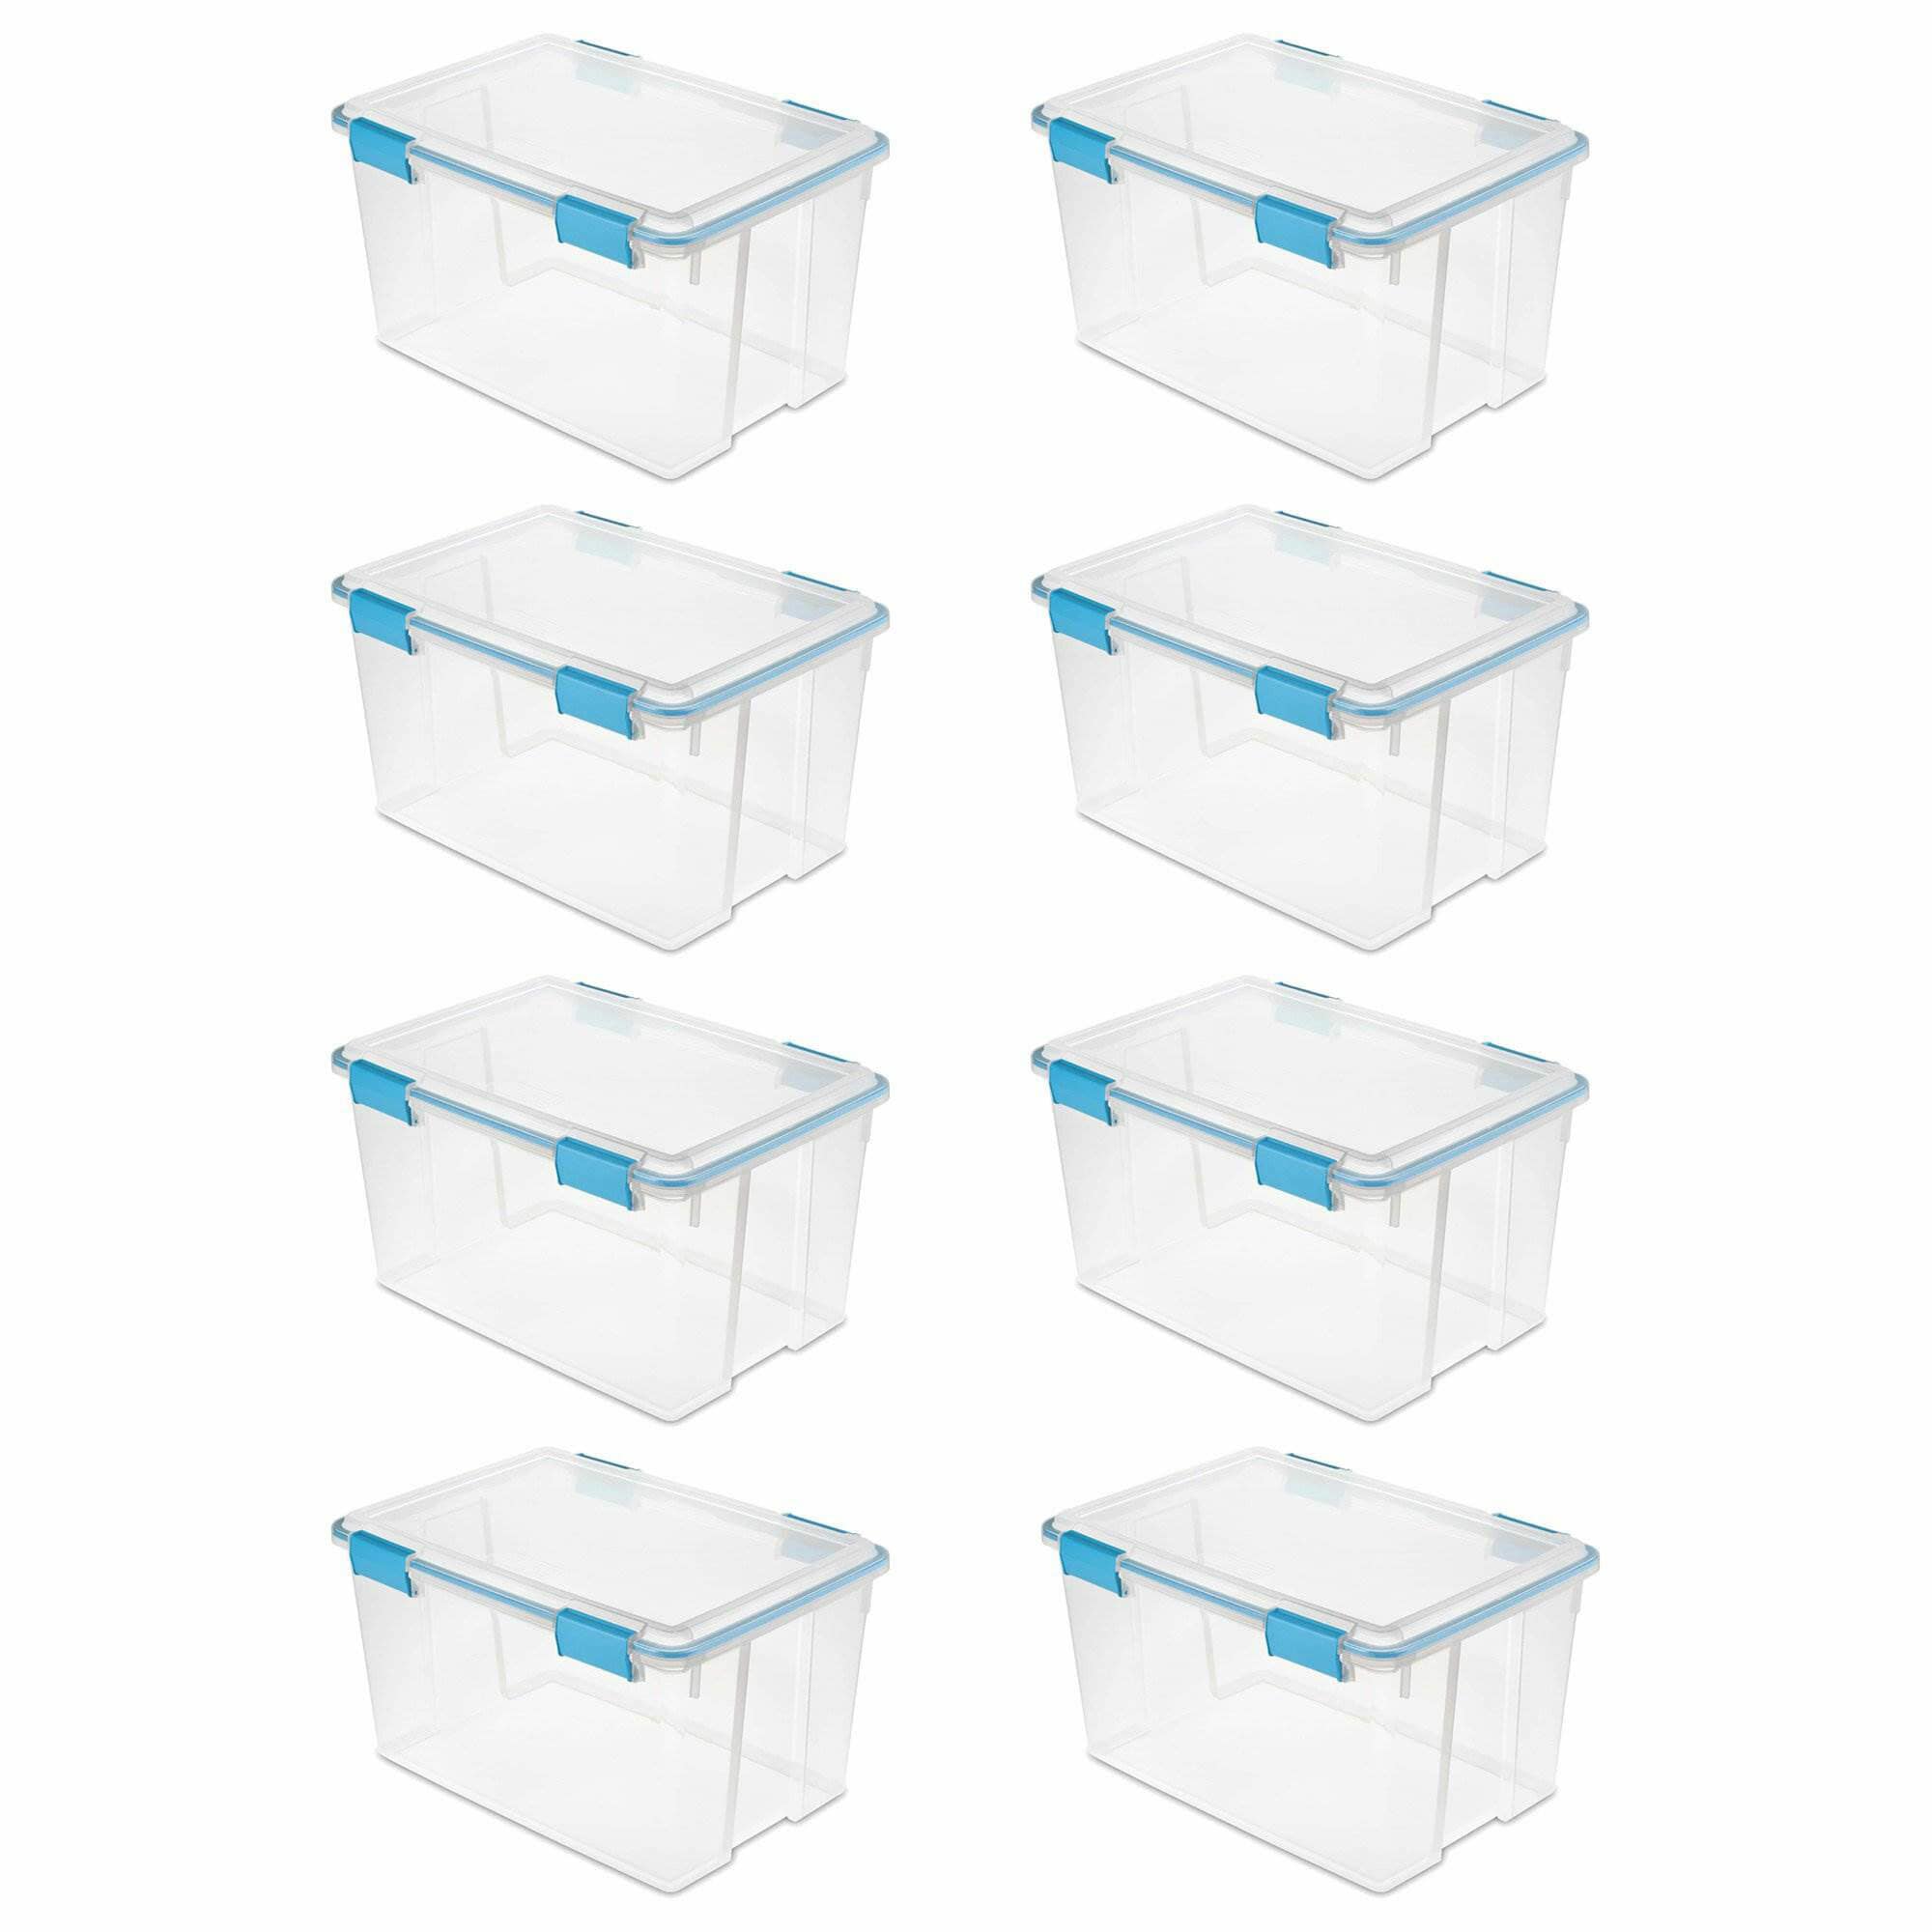  Sterilite 30 Gal Gasket Tote, Heavy Duty Stackable Storage Bin  with Latching Lid, Plastic Container to Organize Basement, Gray Base and Lid,  3-Pack